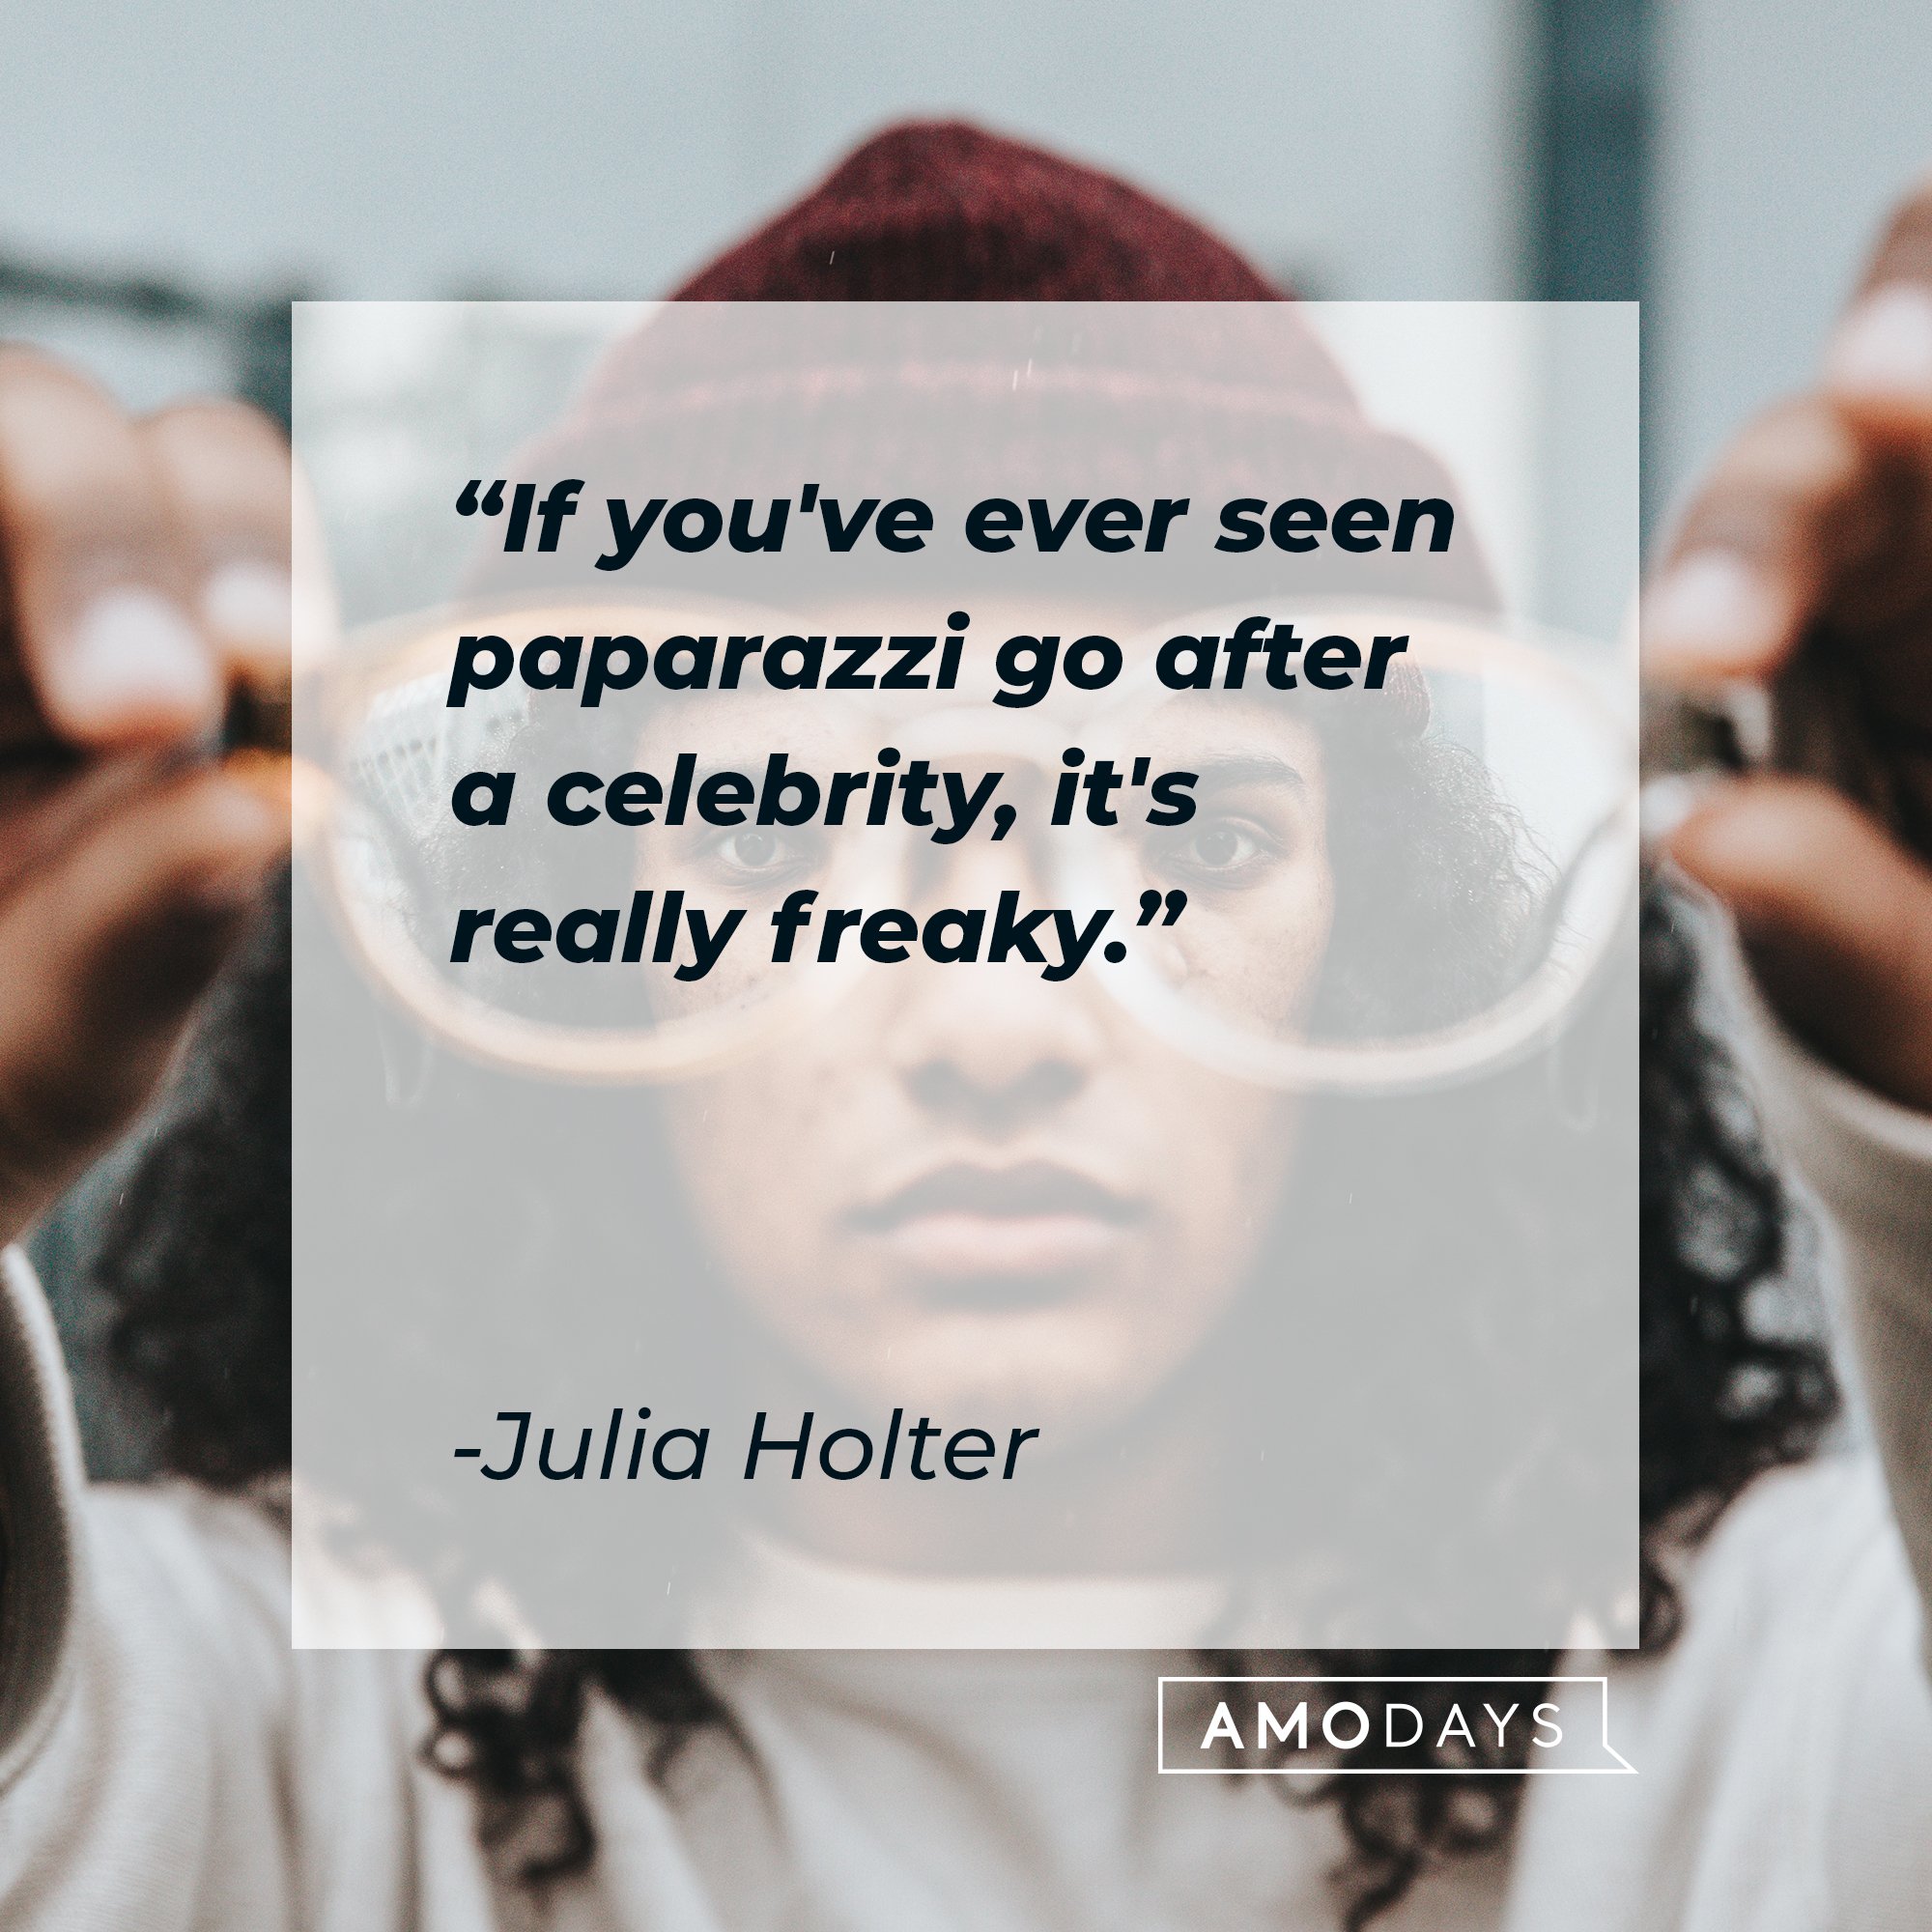 Julia Holter’s quote: "If you've ever seen paparazzi go after a celebrity, it's really freaky." | Image: AmoDays